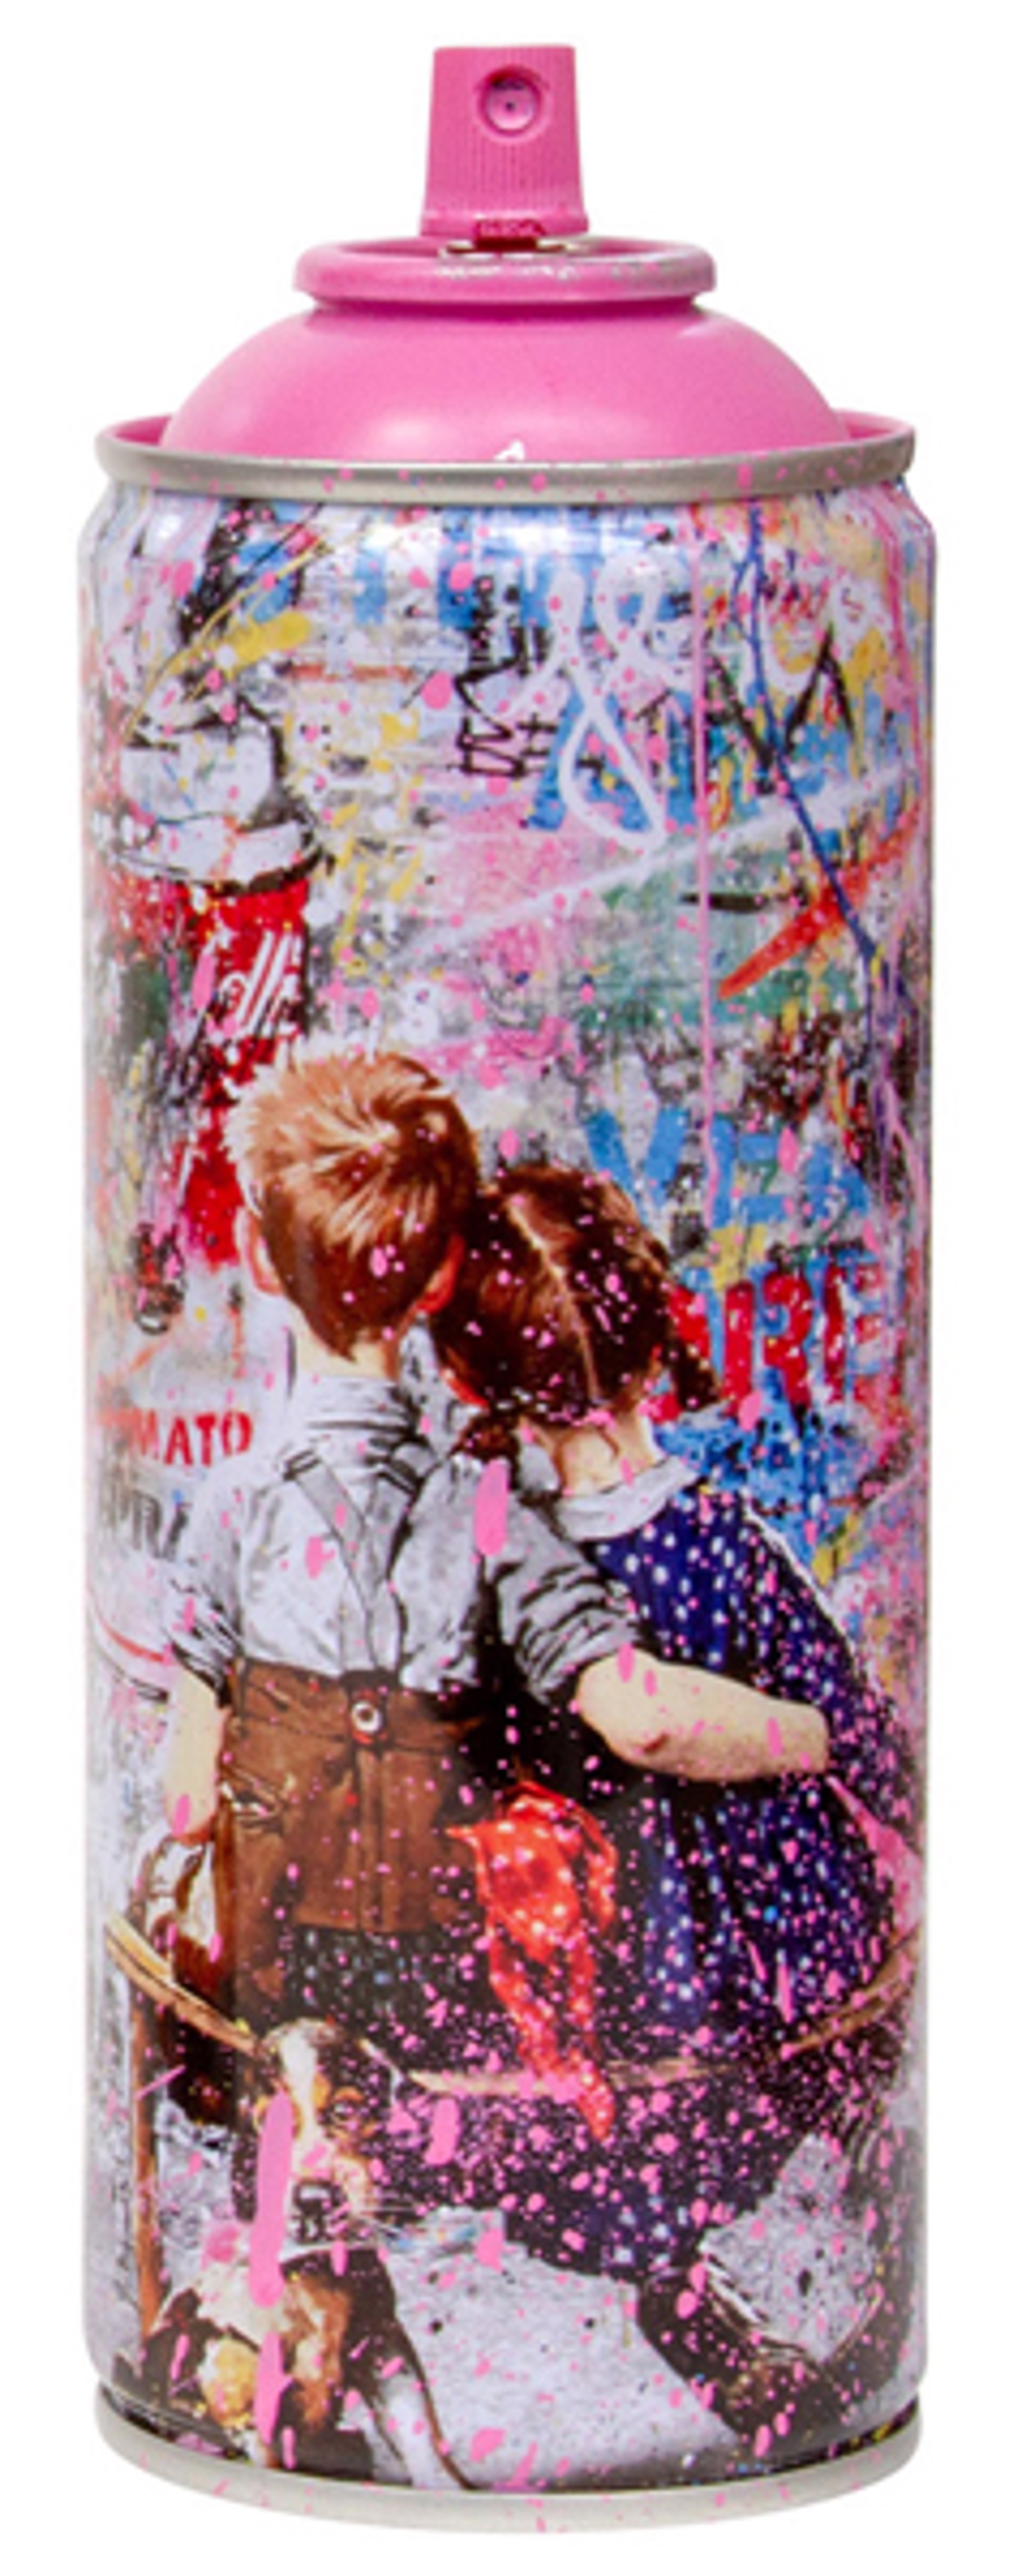 Work Well Together - Pink by Mr.Brainwash